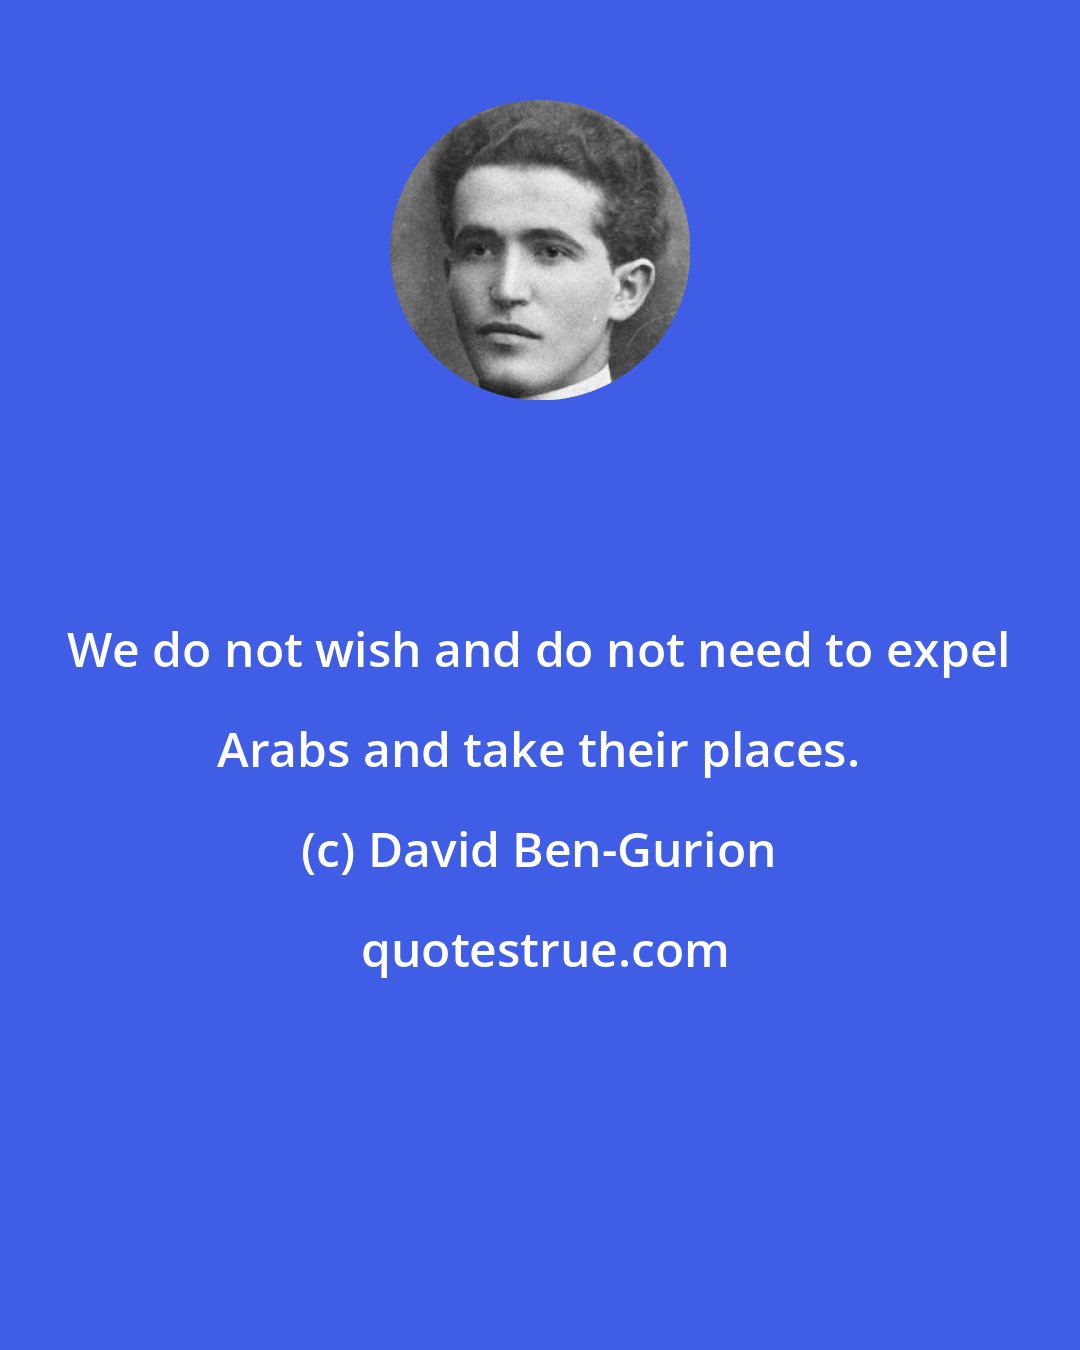 David Ben-Gurion: We do not wish and do not need to expel Arabs and take their places.